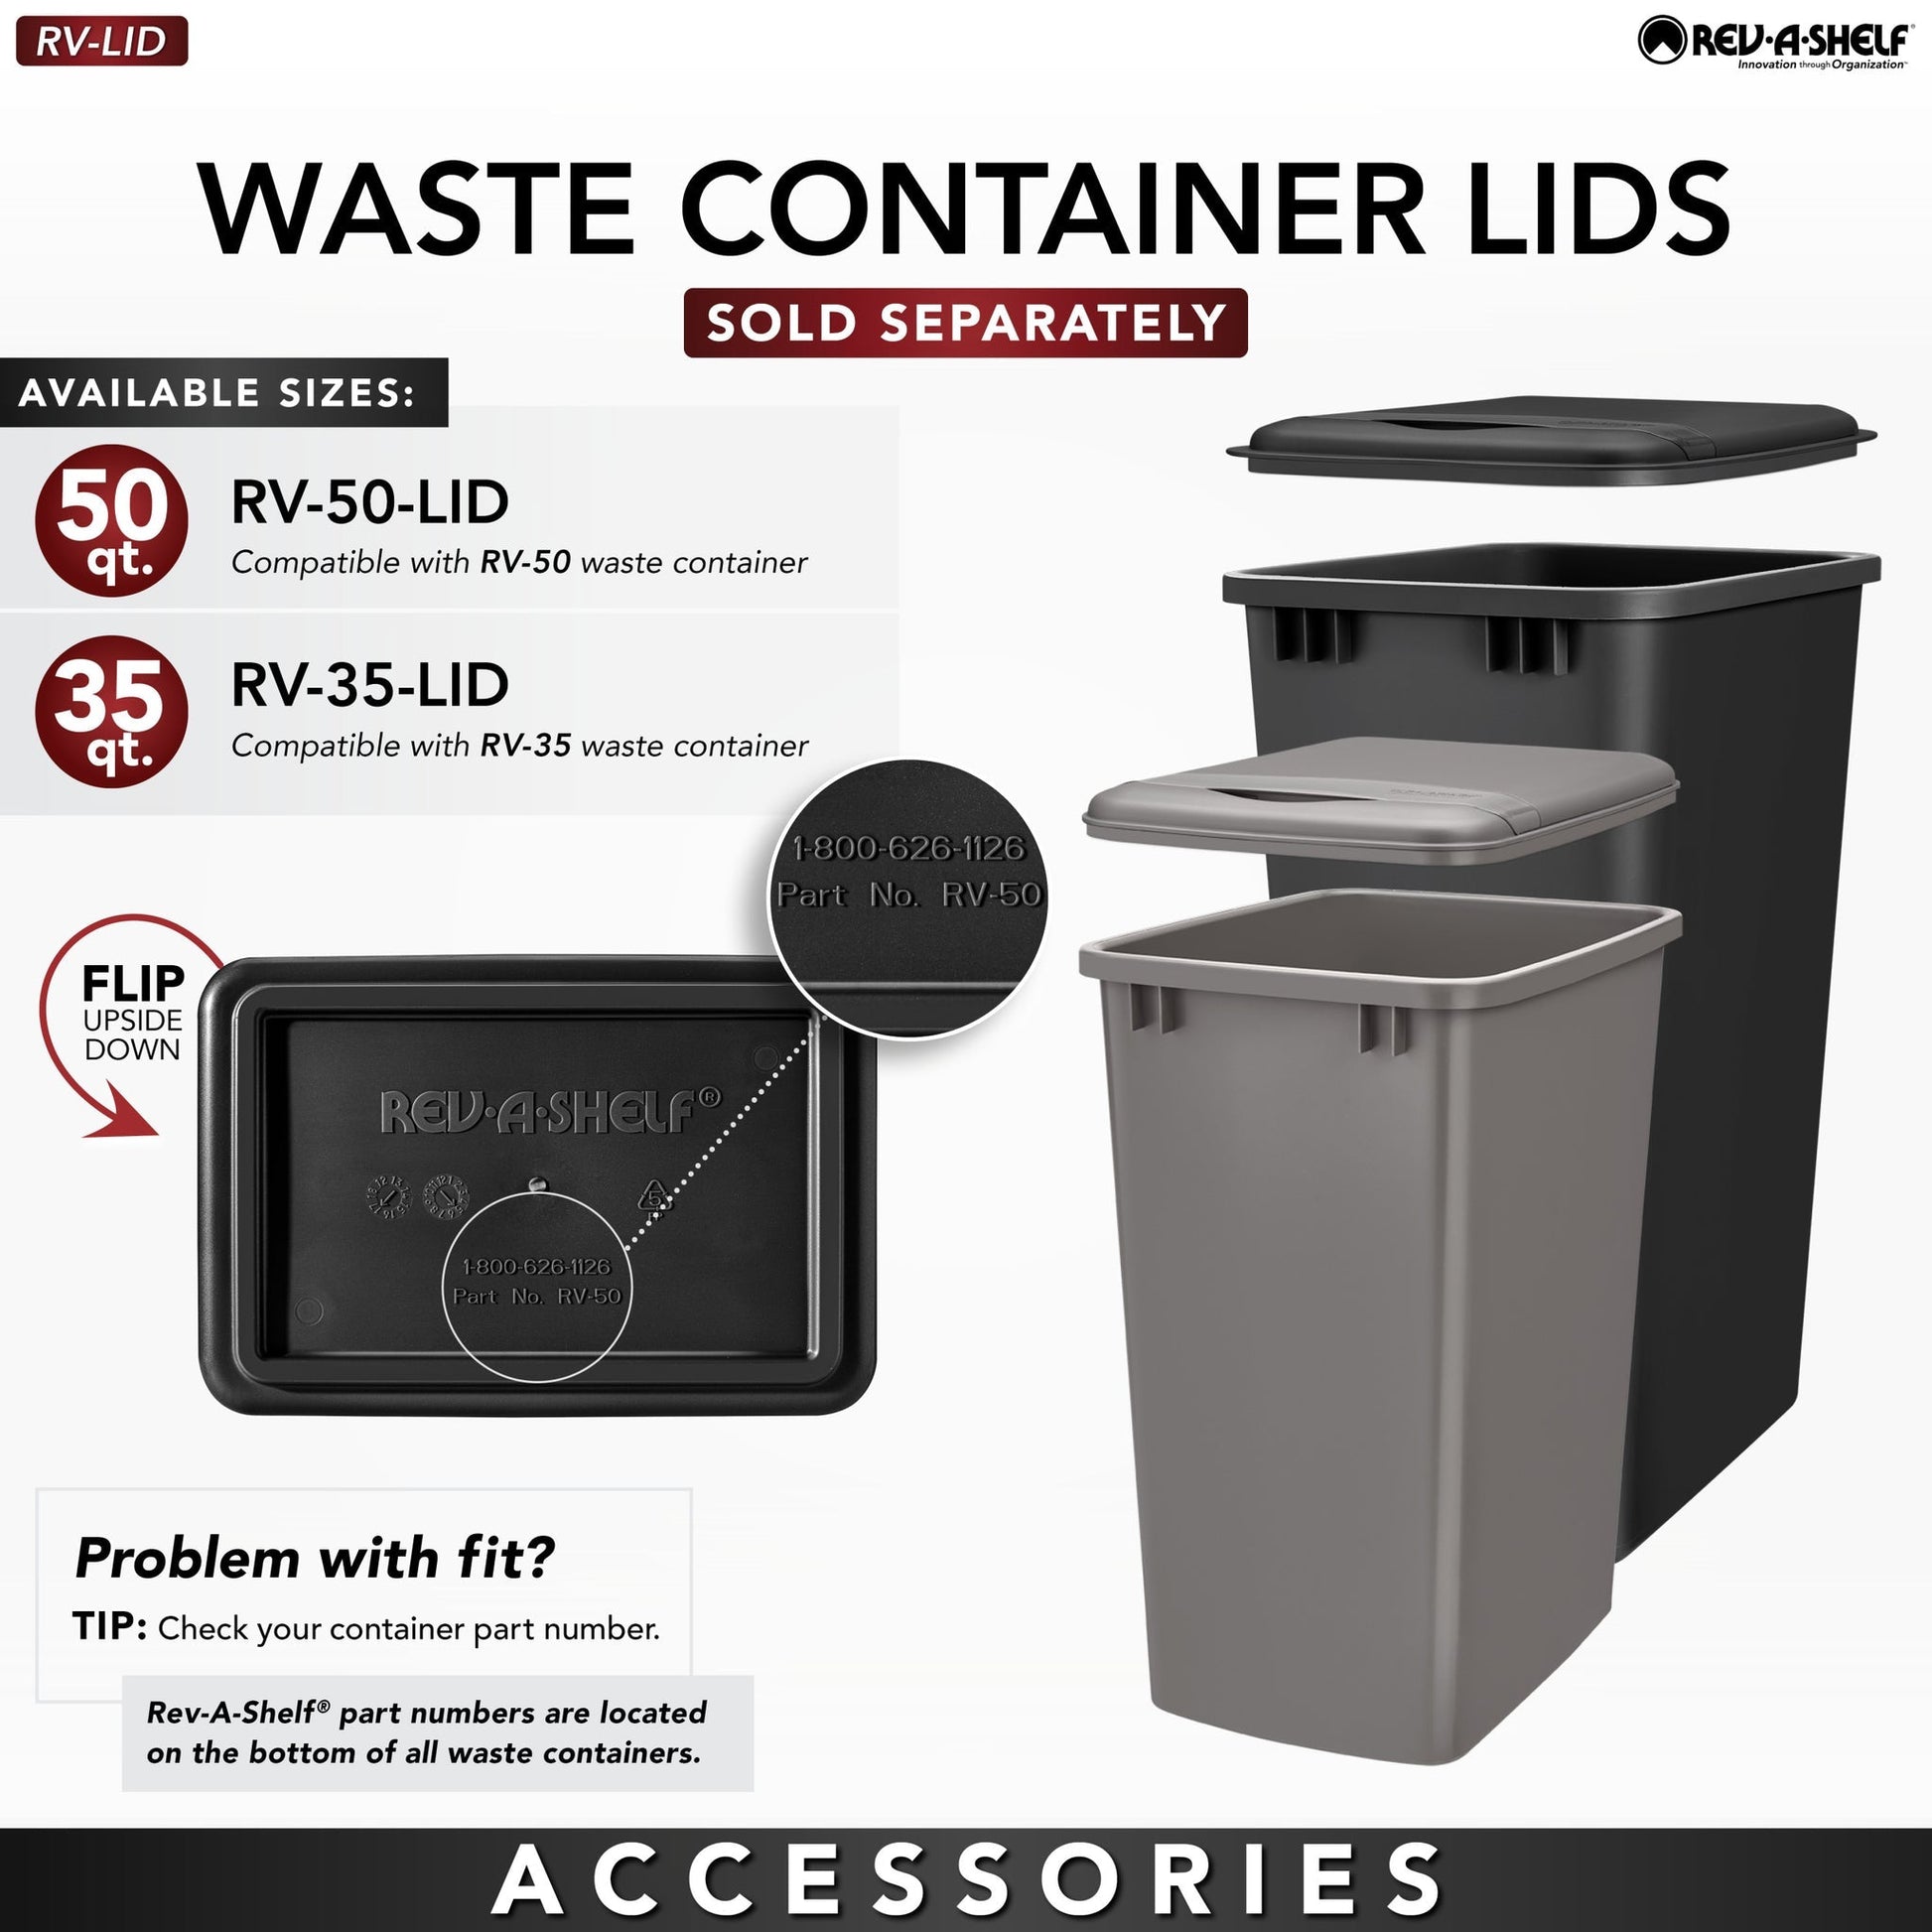 Rev-A-Shelf - Aluminum Pull Out Trash/Waste Container with Soft Open/Close - 5149-18DM-217